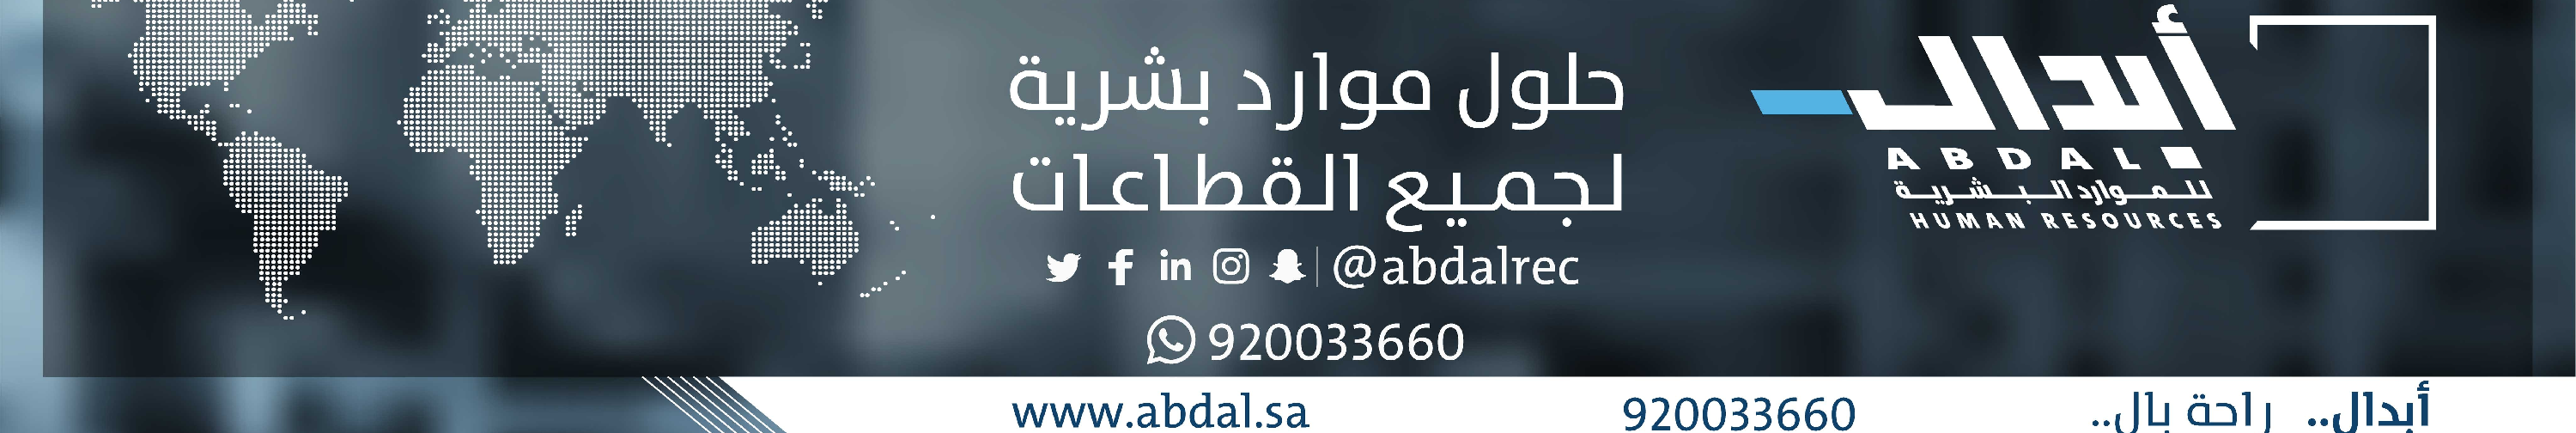 Abdal Human Resources background